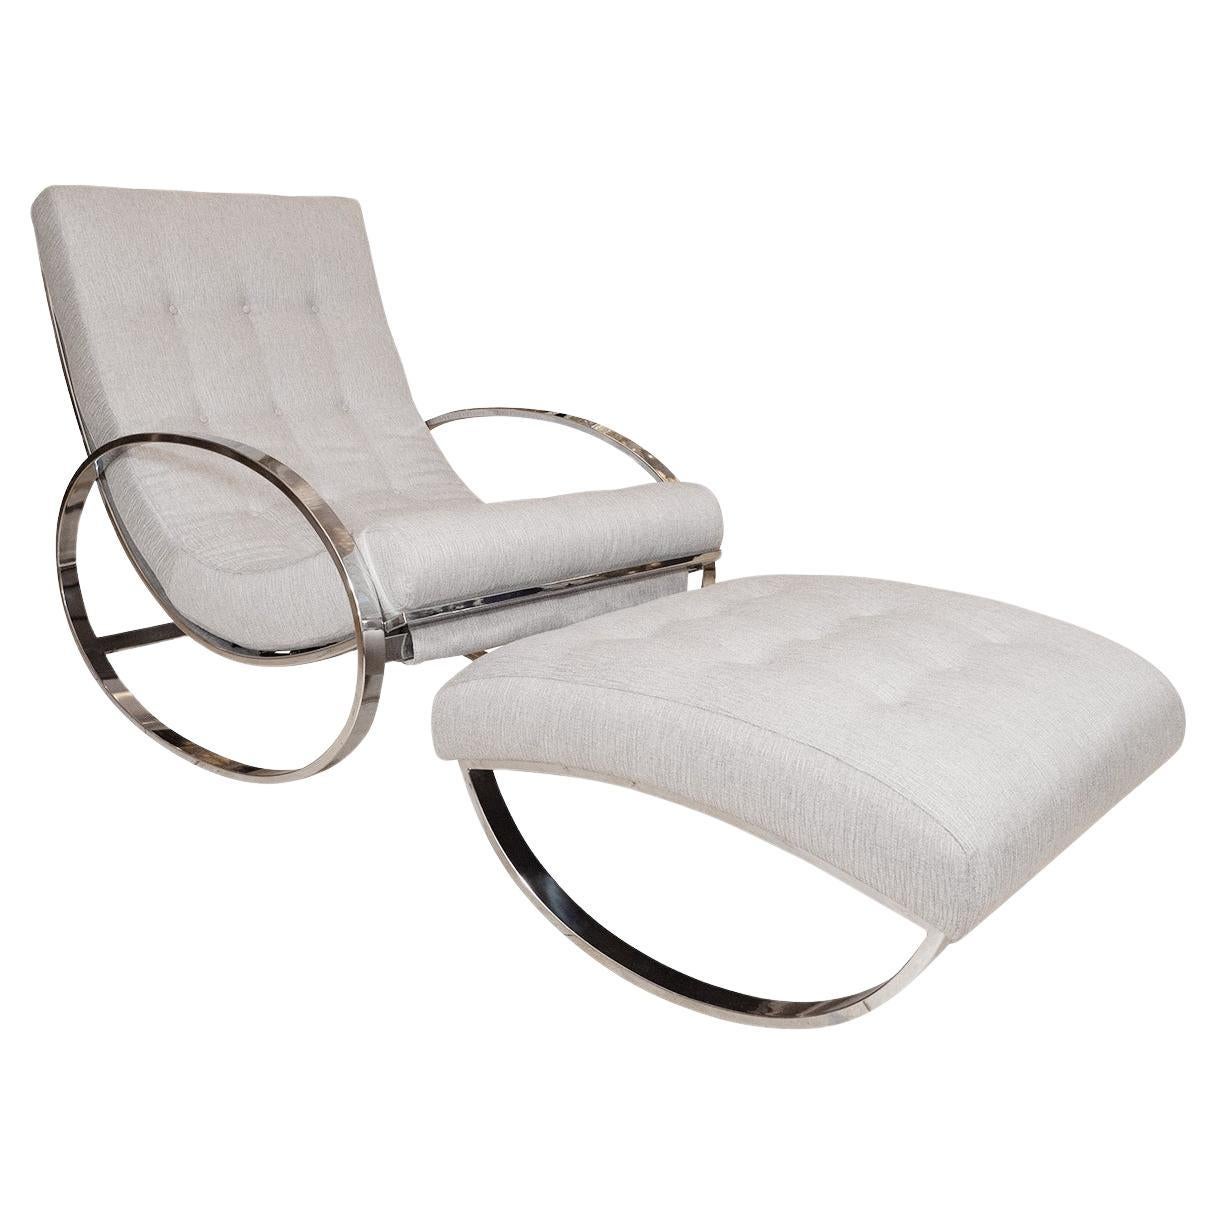 Modern rocking chair and ottoman For Sale